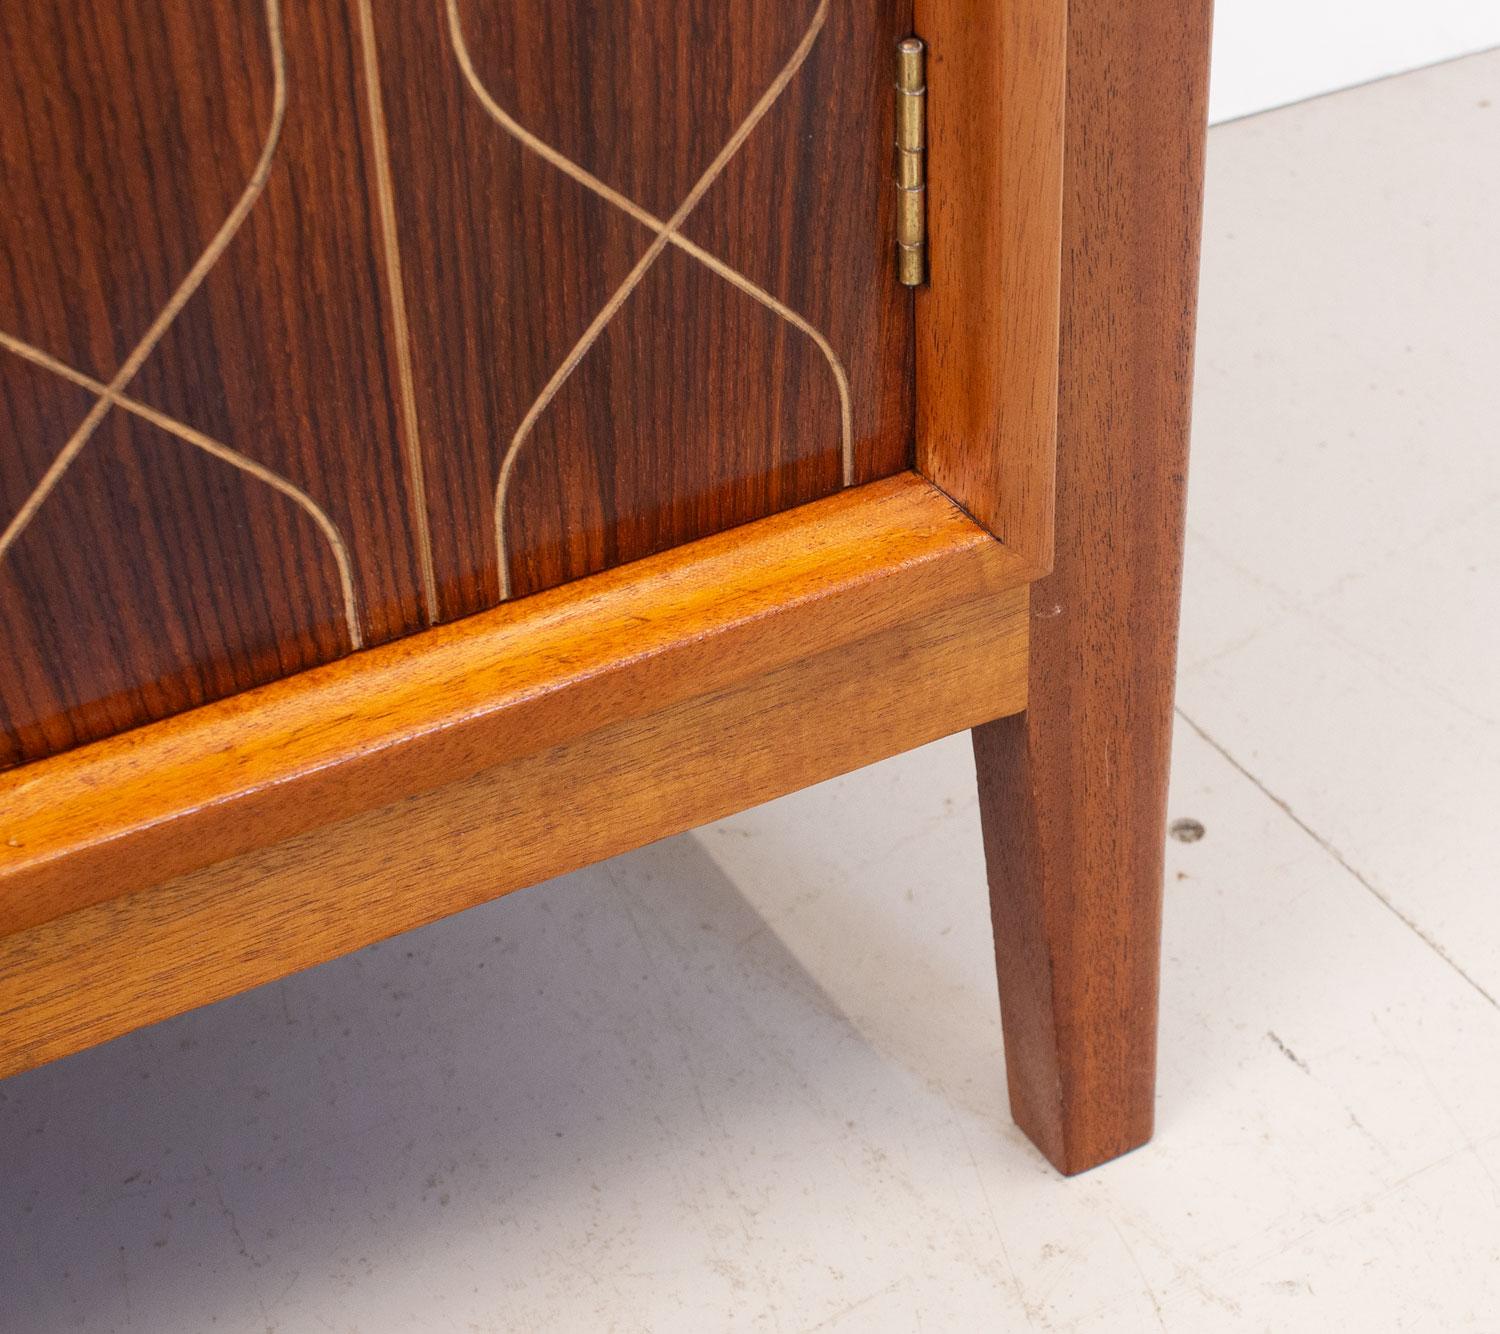 British Double Helix Rosewood Sideboard by Gordon Russell, 1950s